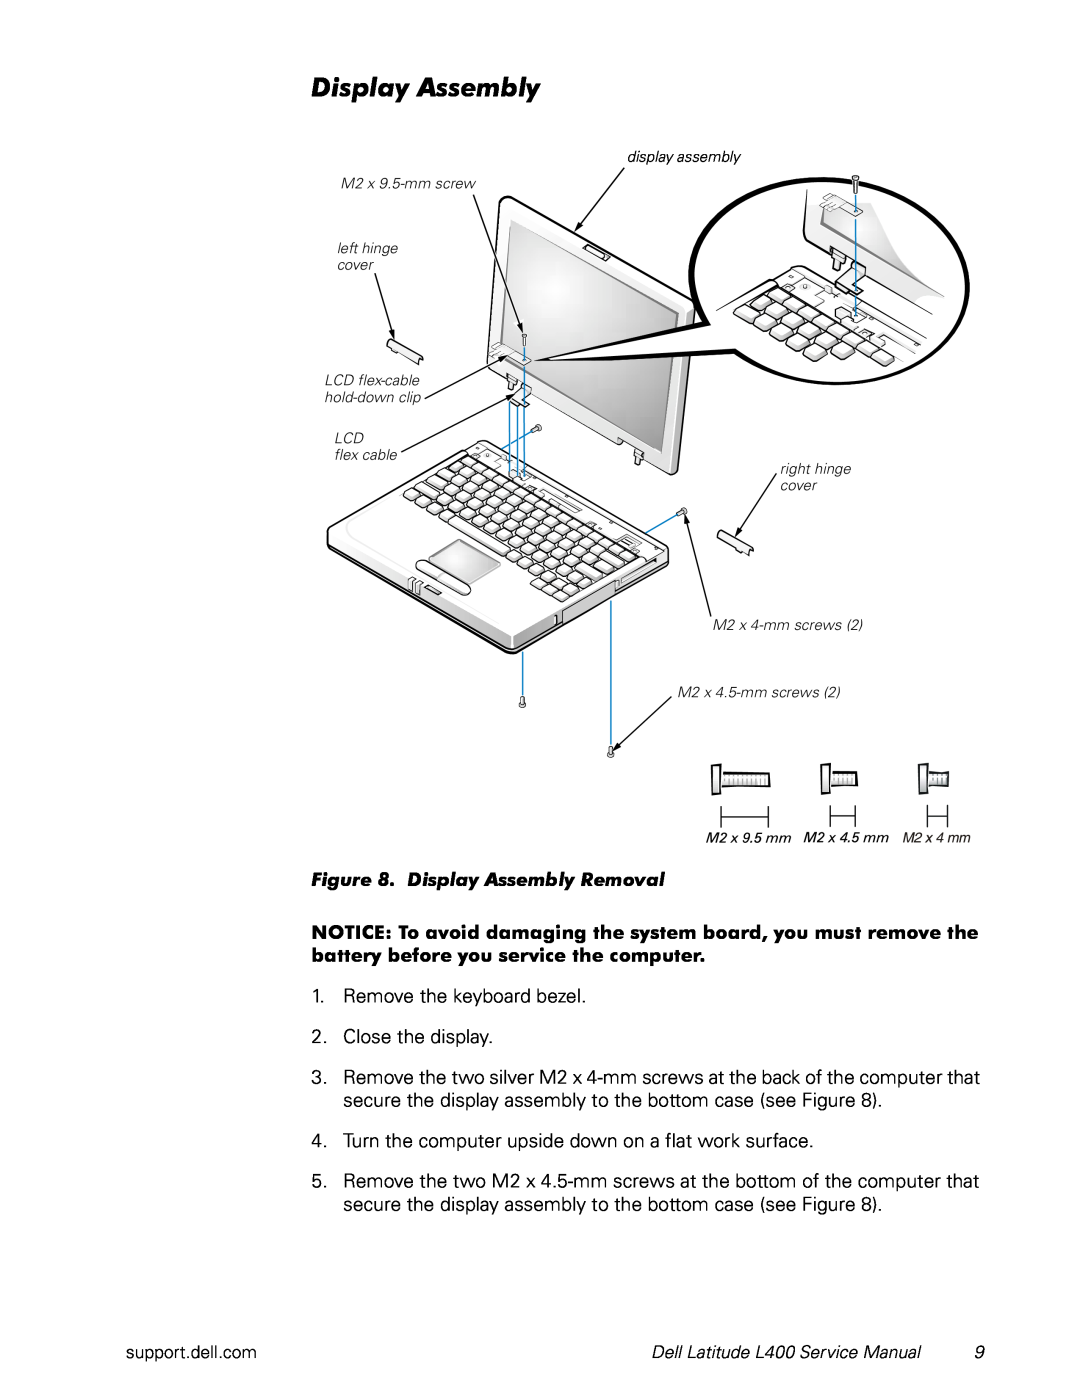 Dell L400 service manual Display Assembly Removal 